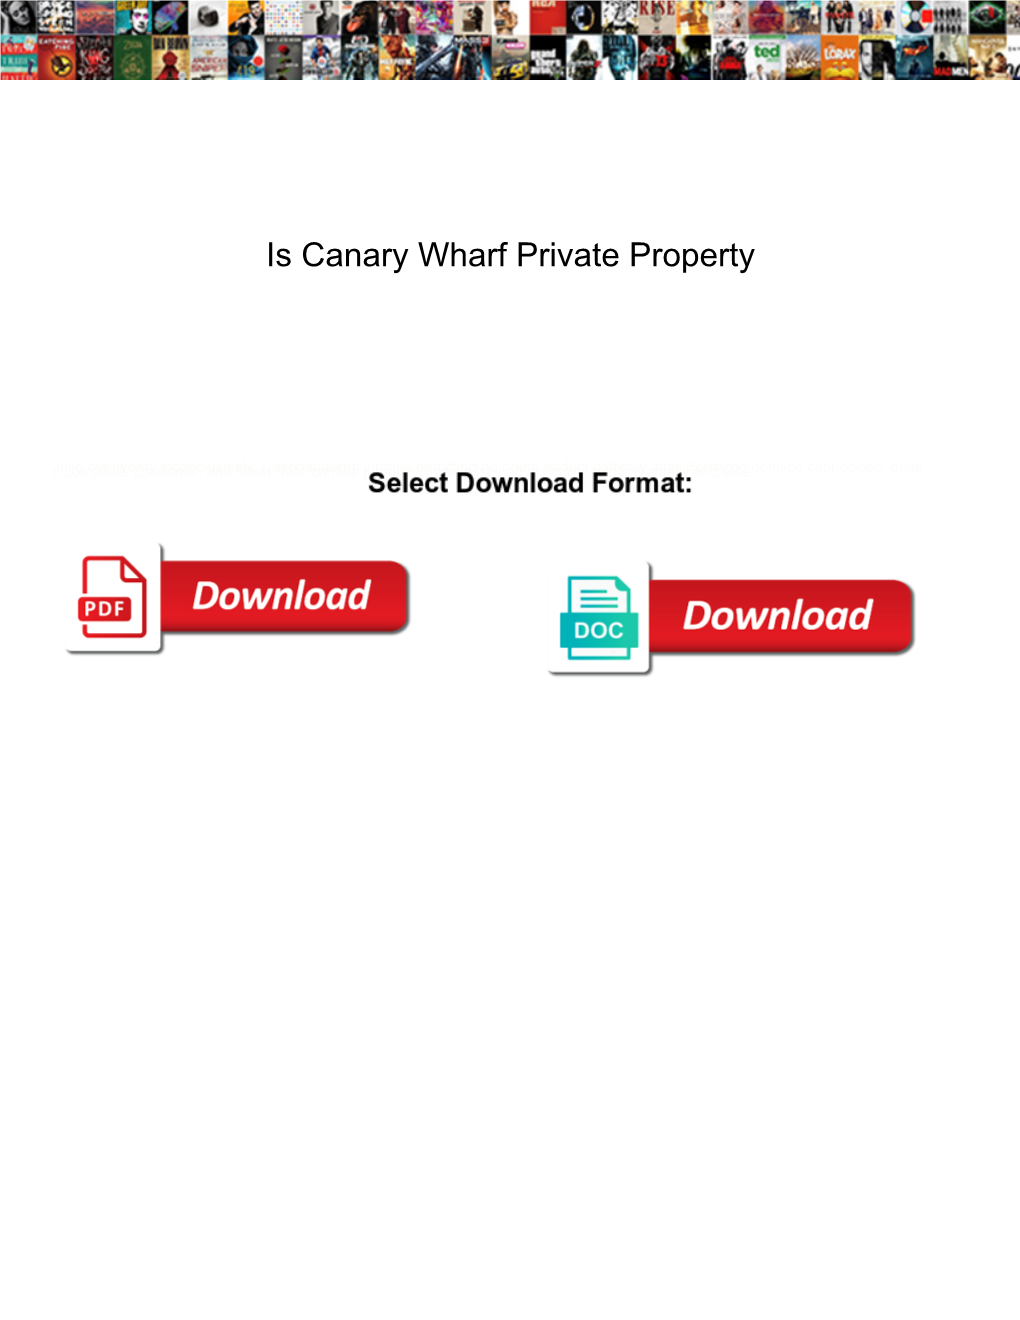 Is Canary Wharf Private Property